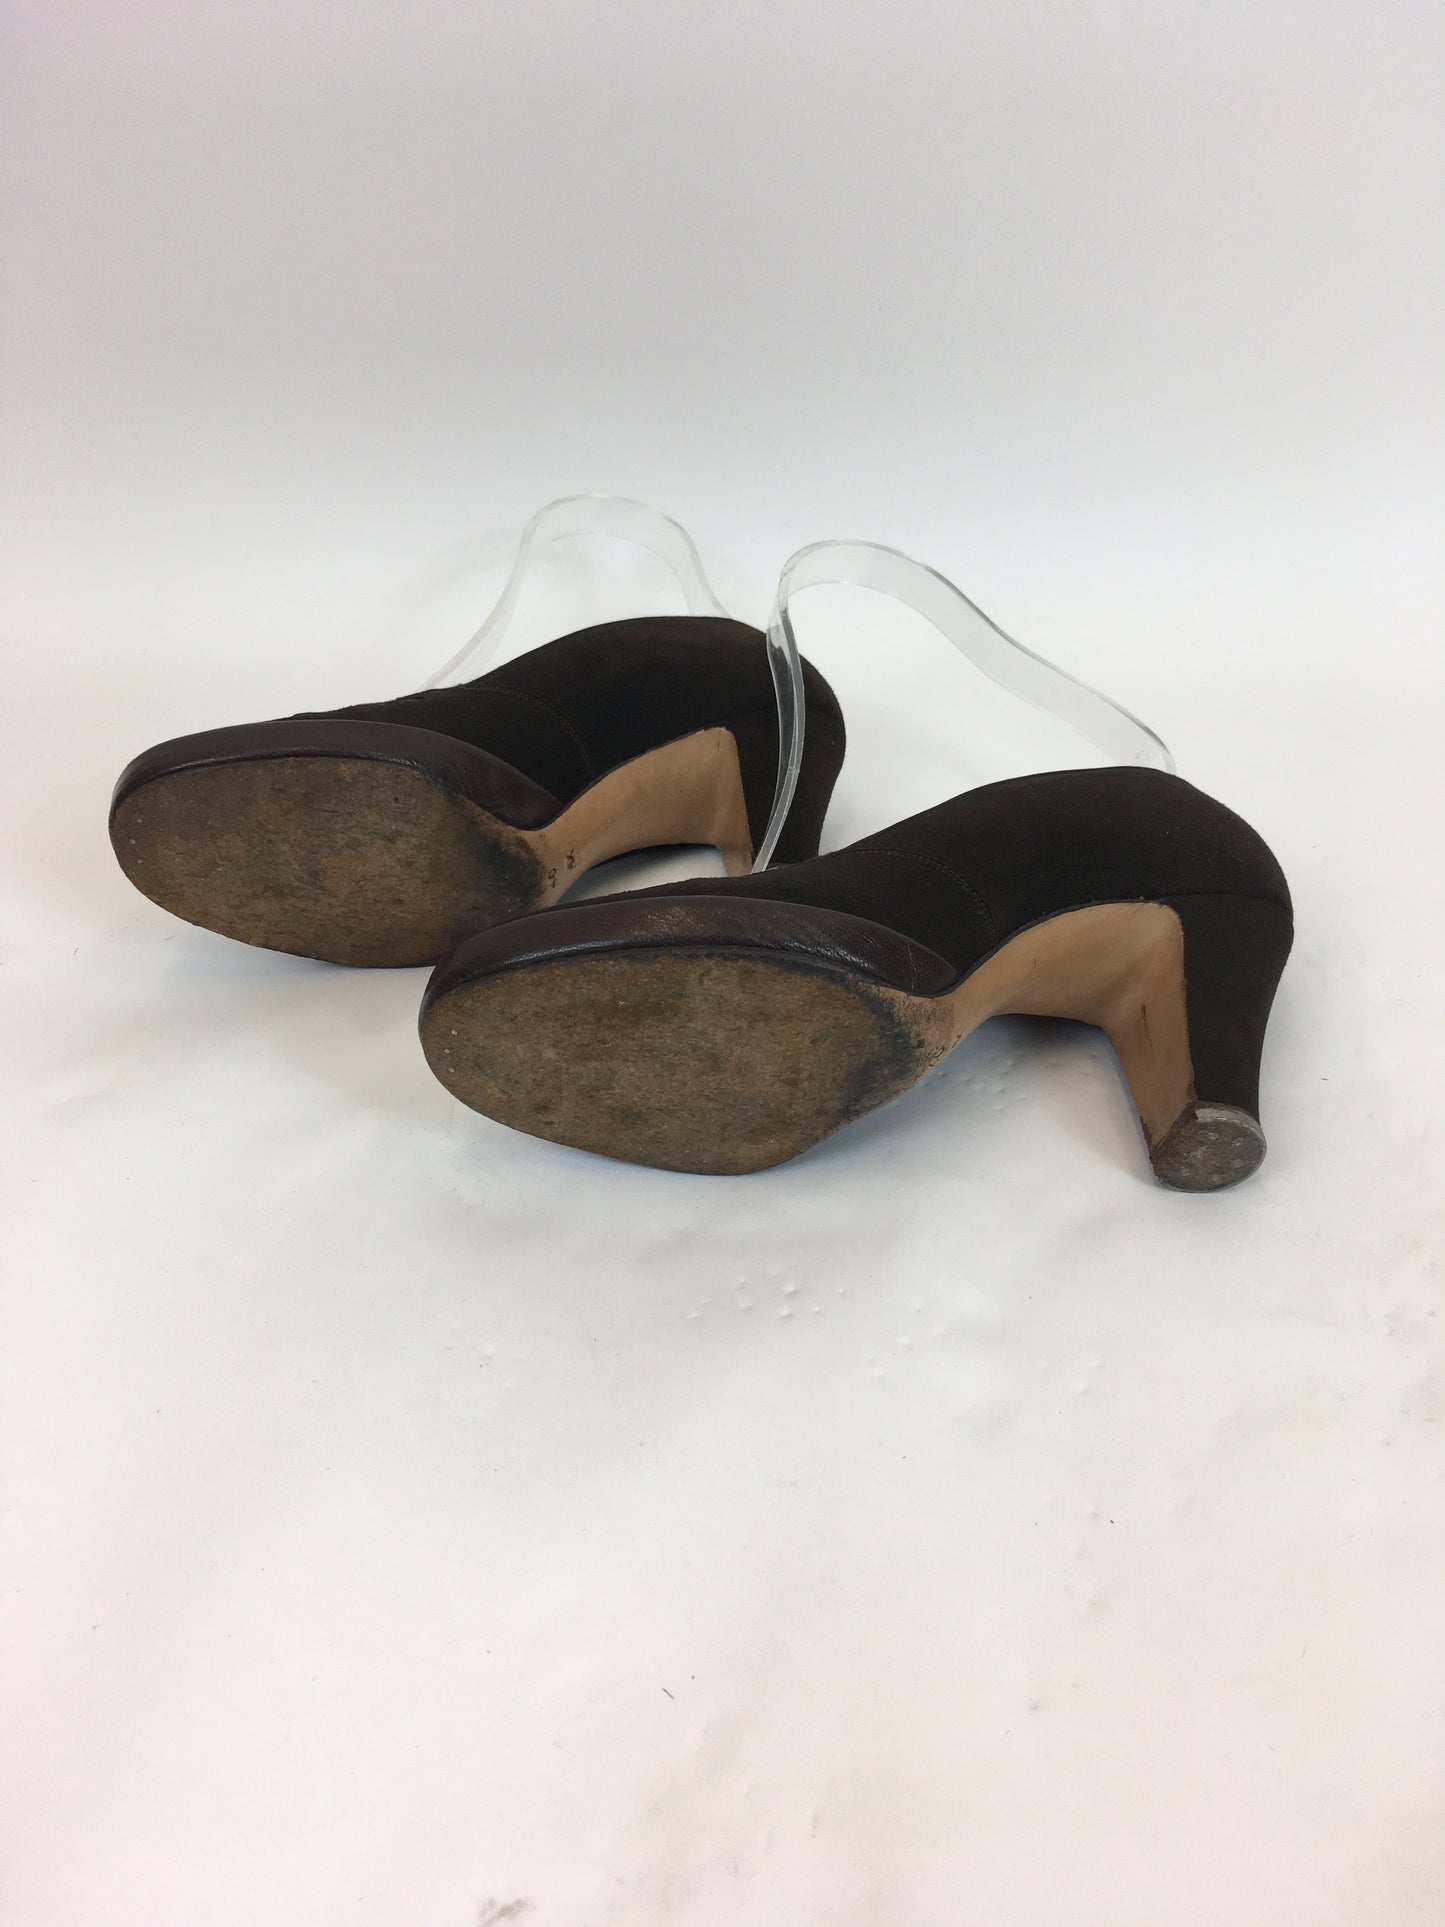 Original 1940's Stunning CC41 Norvic Heels With Original Box - In Chocolate Brown Suede